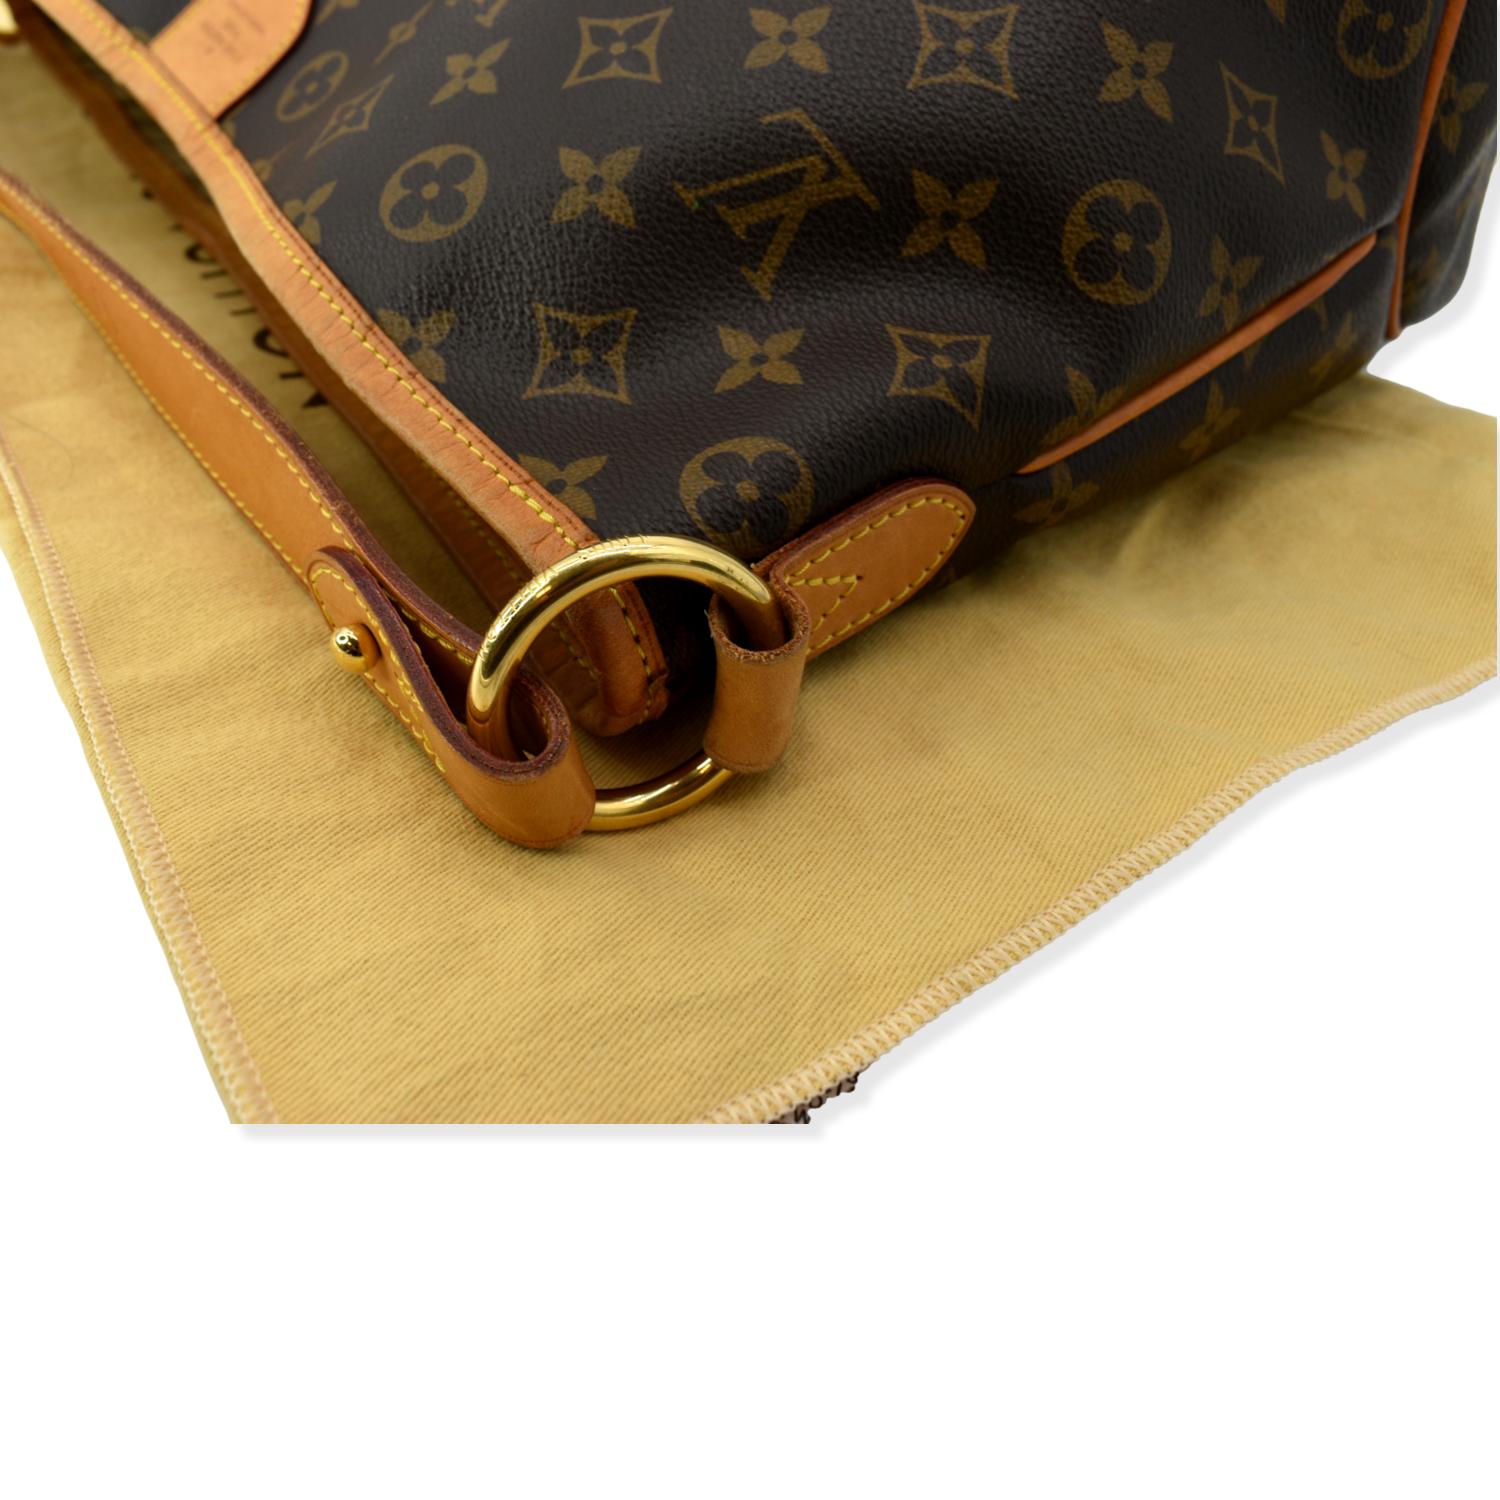 Delightful leather handbag Louis Vuitton Brown in Leather - 31068557